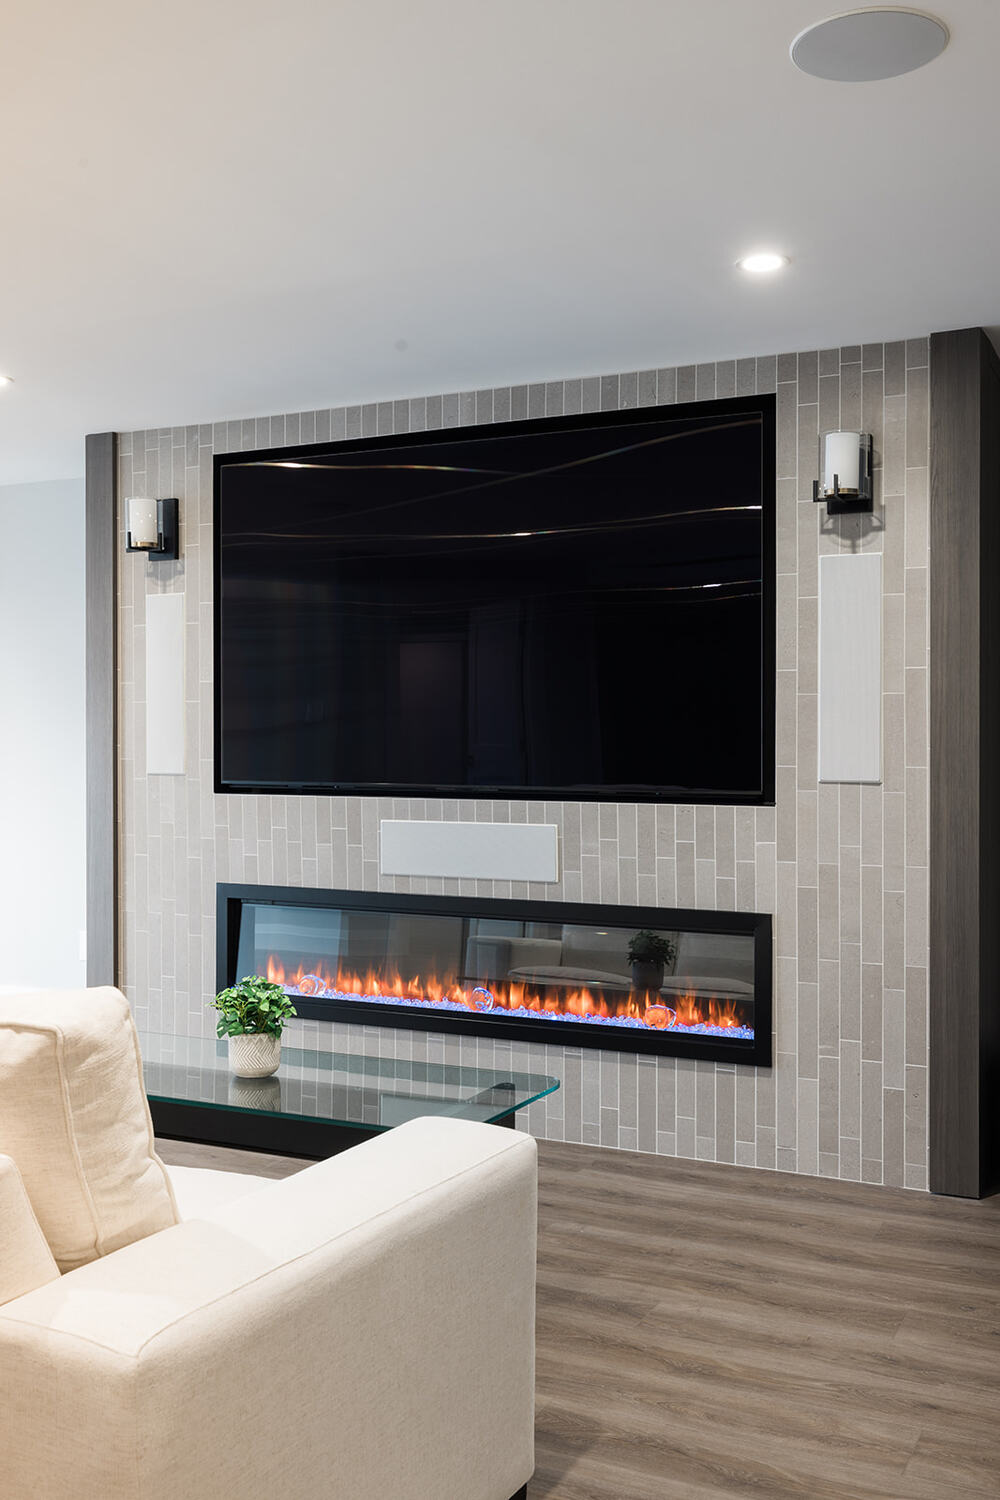 View of custom fireplace in living room in downtown Toronto condo renovation with LVP flooring